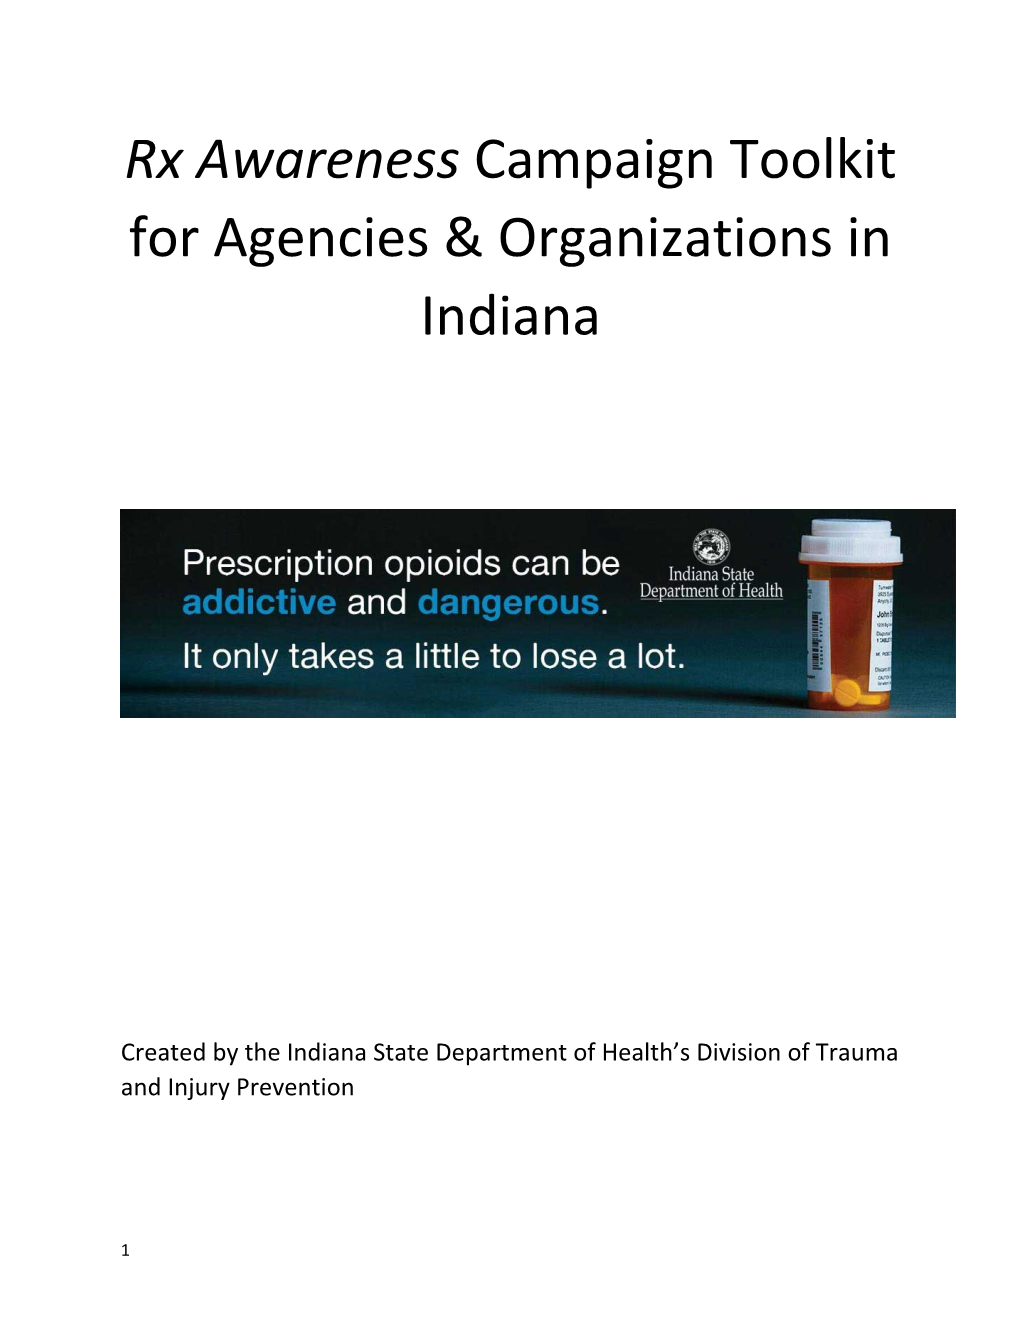 Rx Awareness Campaign Toolkit for Agencies & Organizations in Indiana